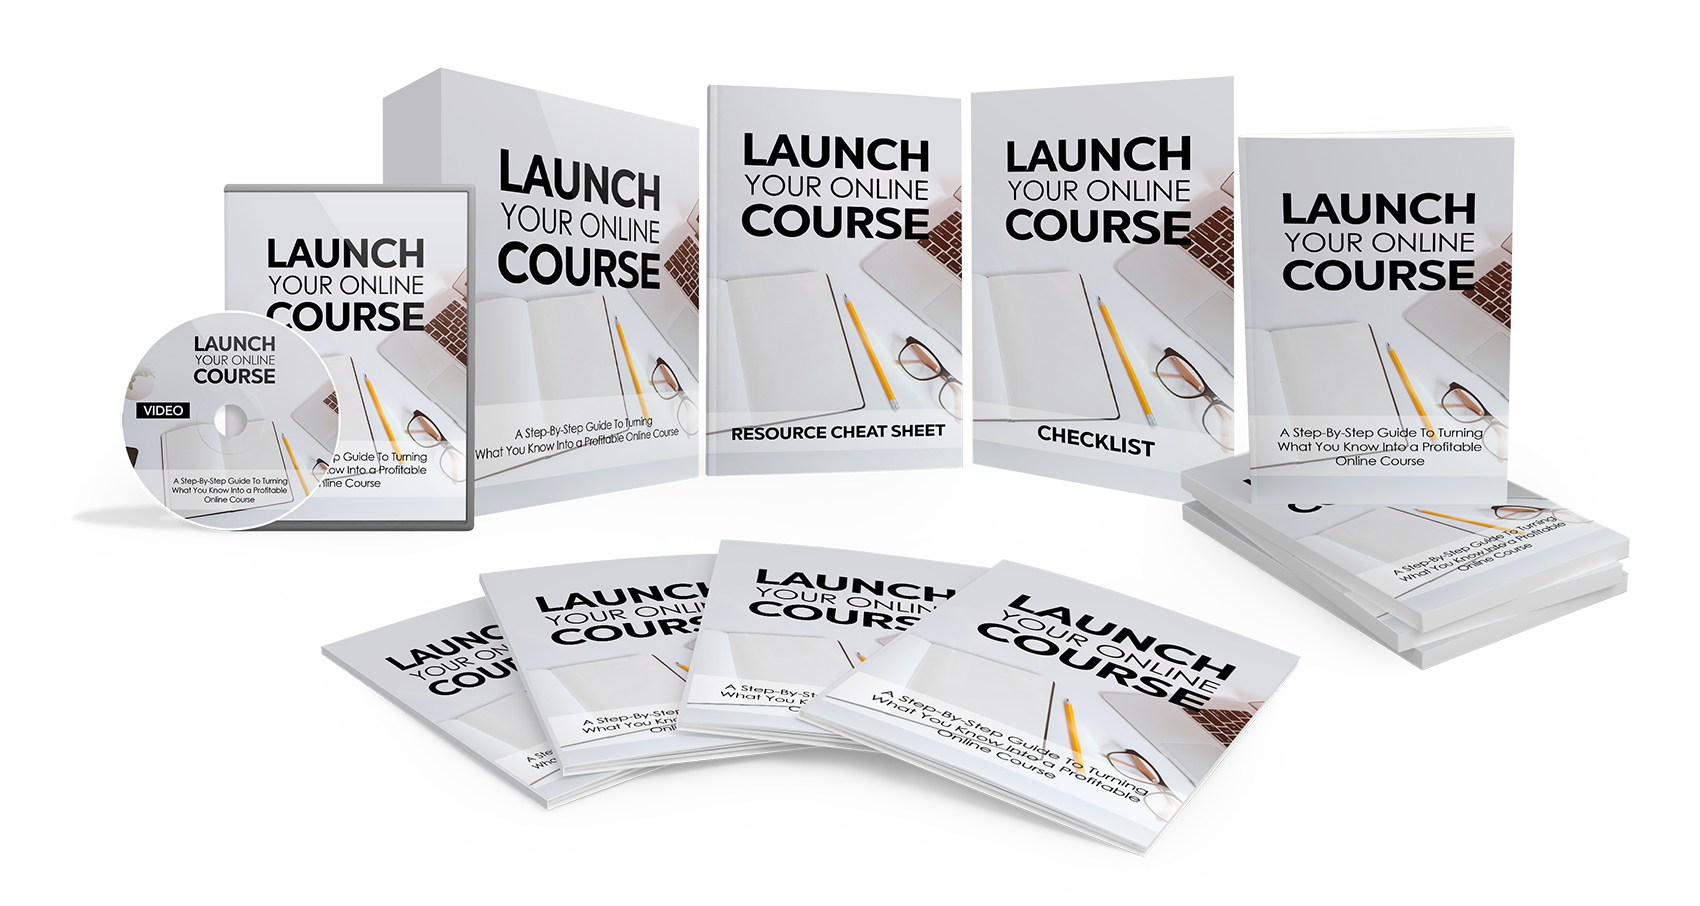 Launch Your Online Course Video Training